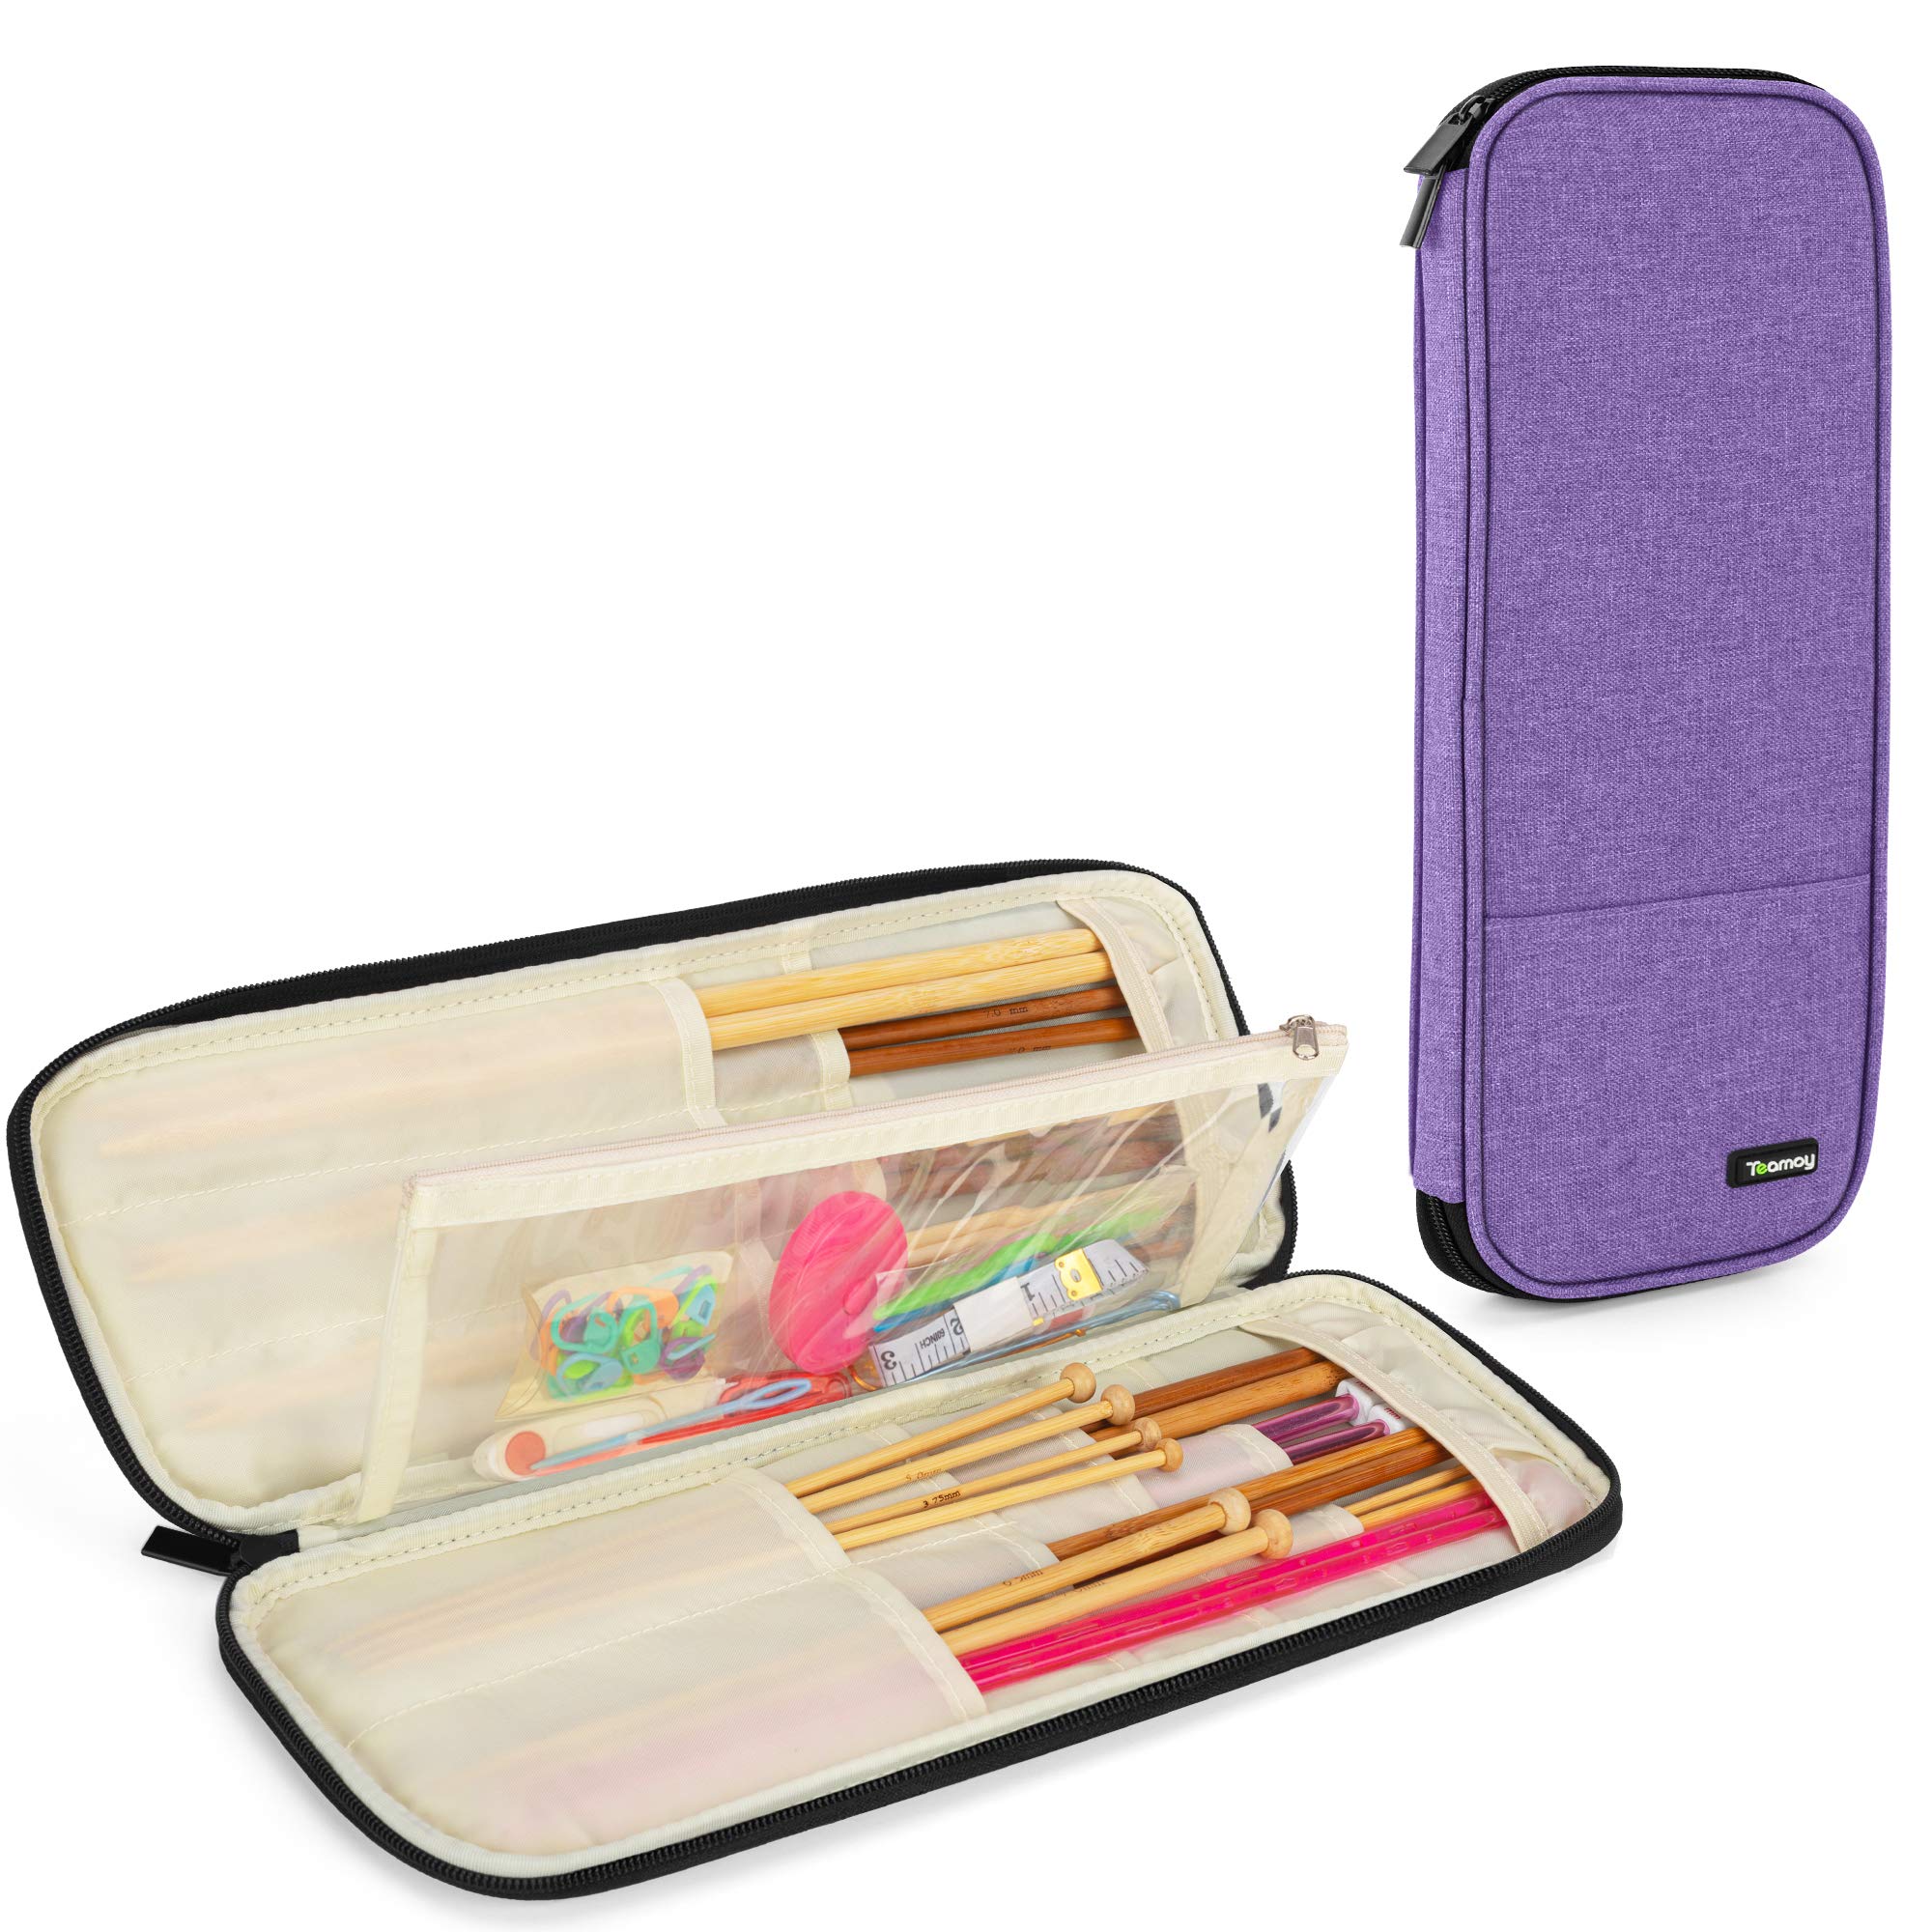 Teamoy Knitting Needles Case (Up to 14'') Travel Organizer Storage Bag for Knitting  Needles Tunisian Crochet Hooks and Accessories Purple Purple Needle Case  (Pack of 1)